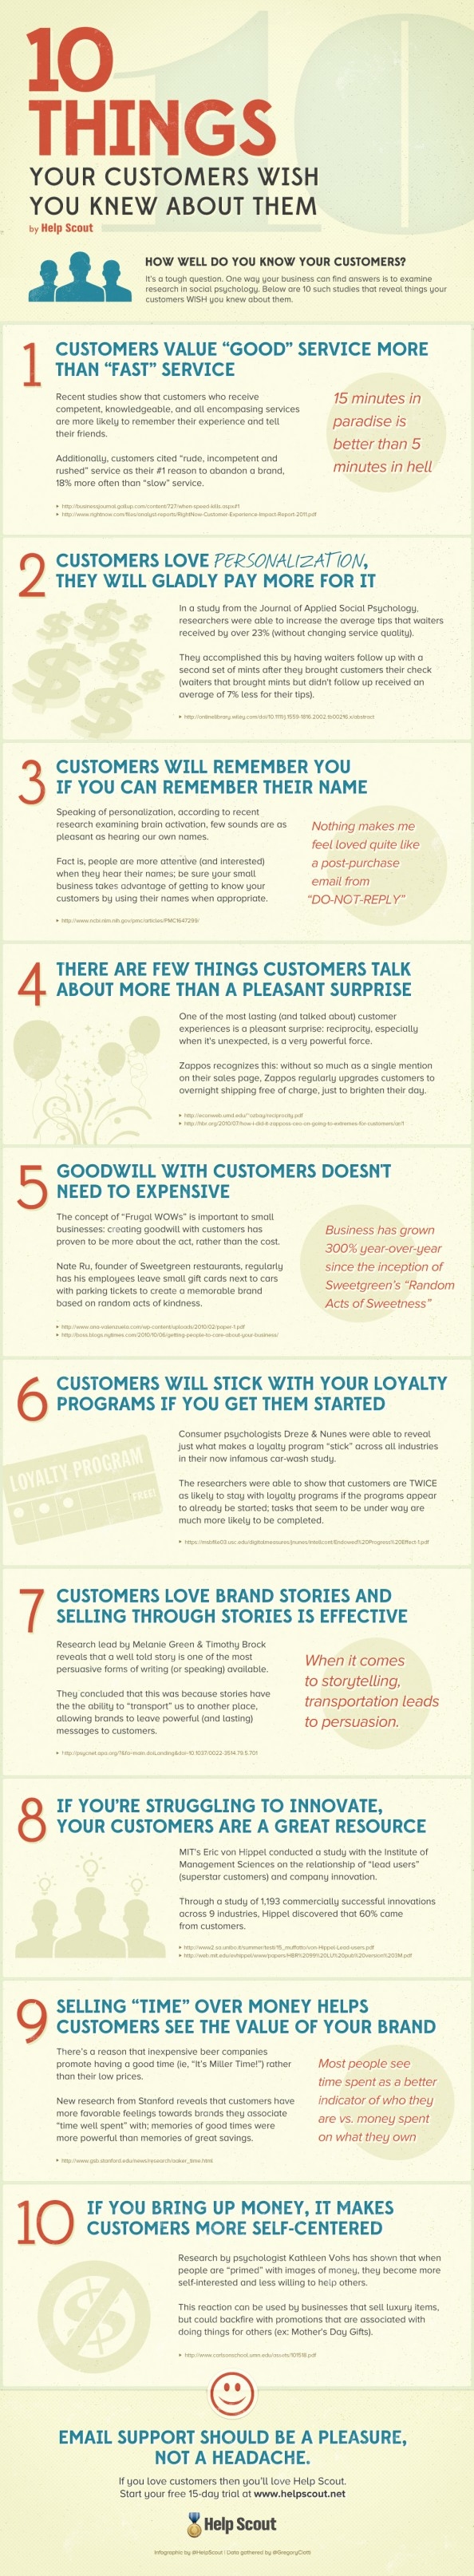 10 Thing Your Customers Wish You Knew About Them